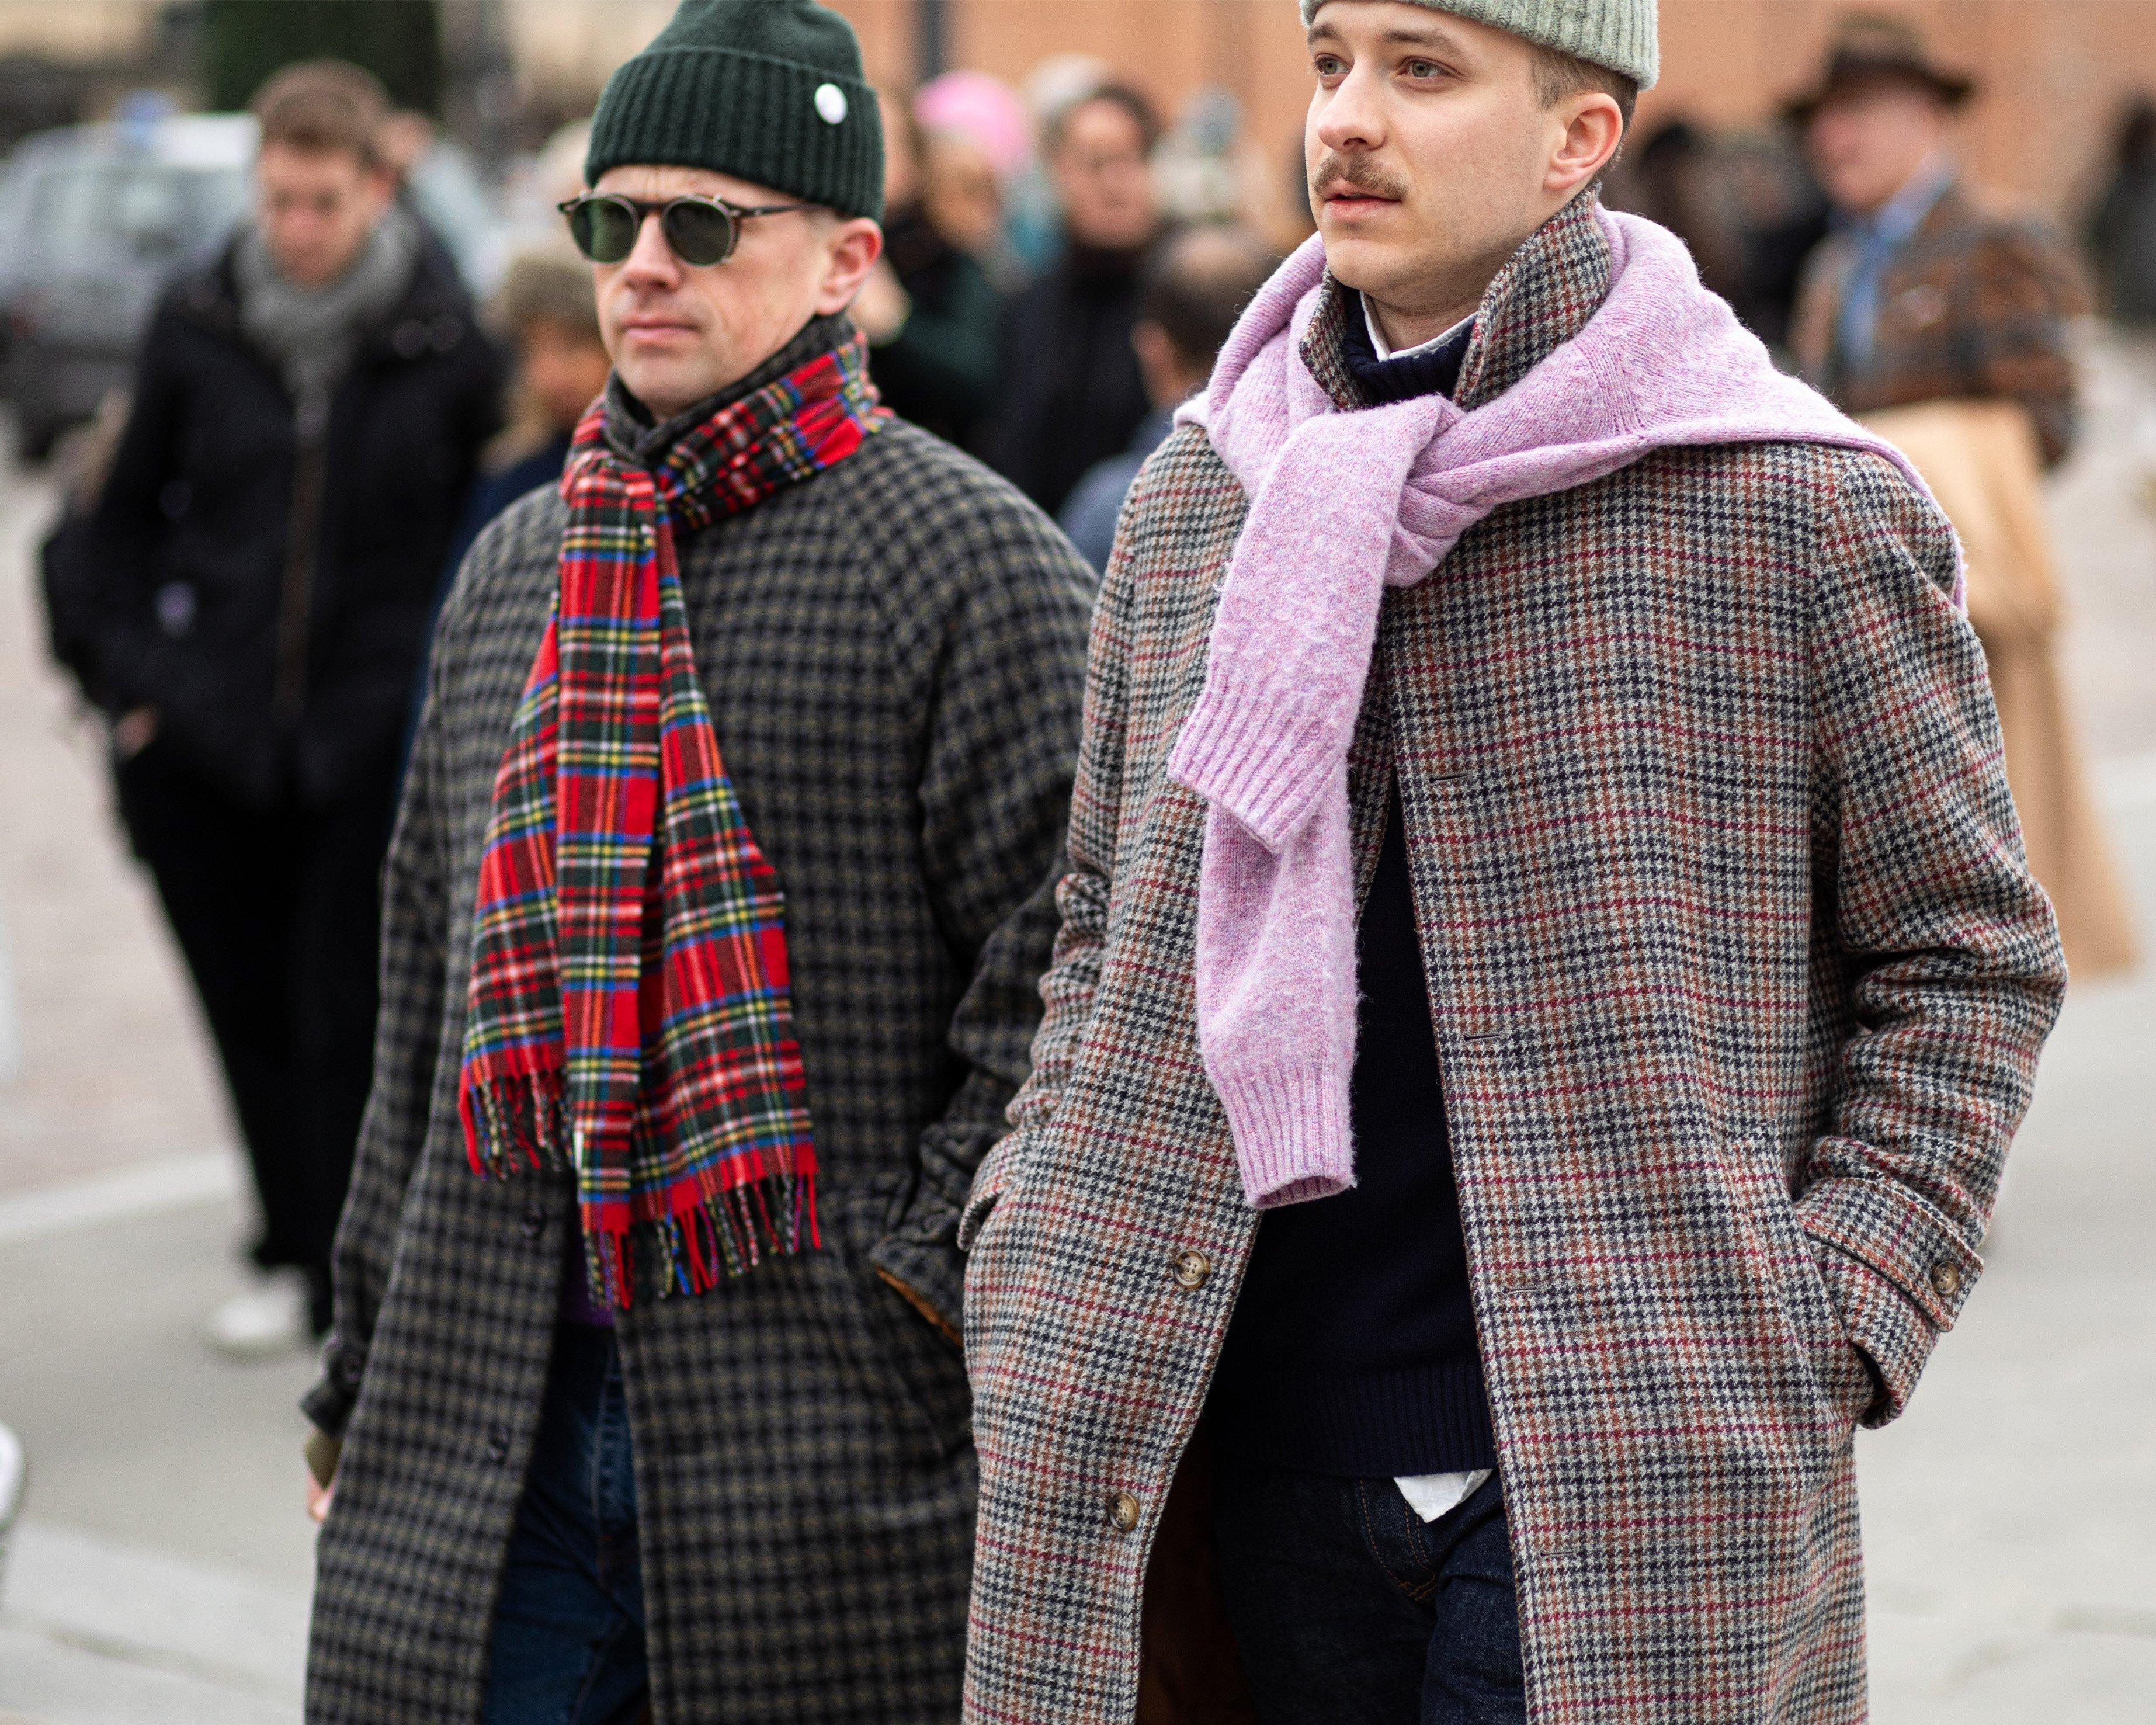 Two men walking down a city street wearing coats and scarves